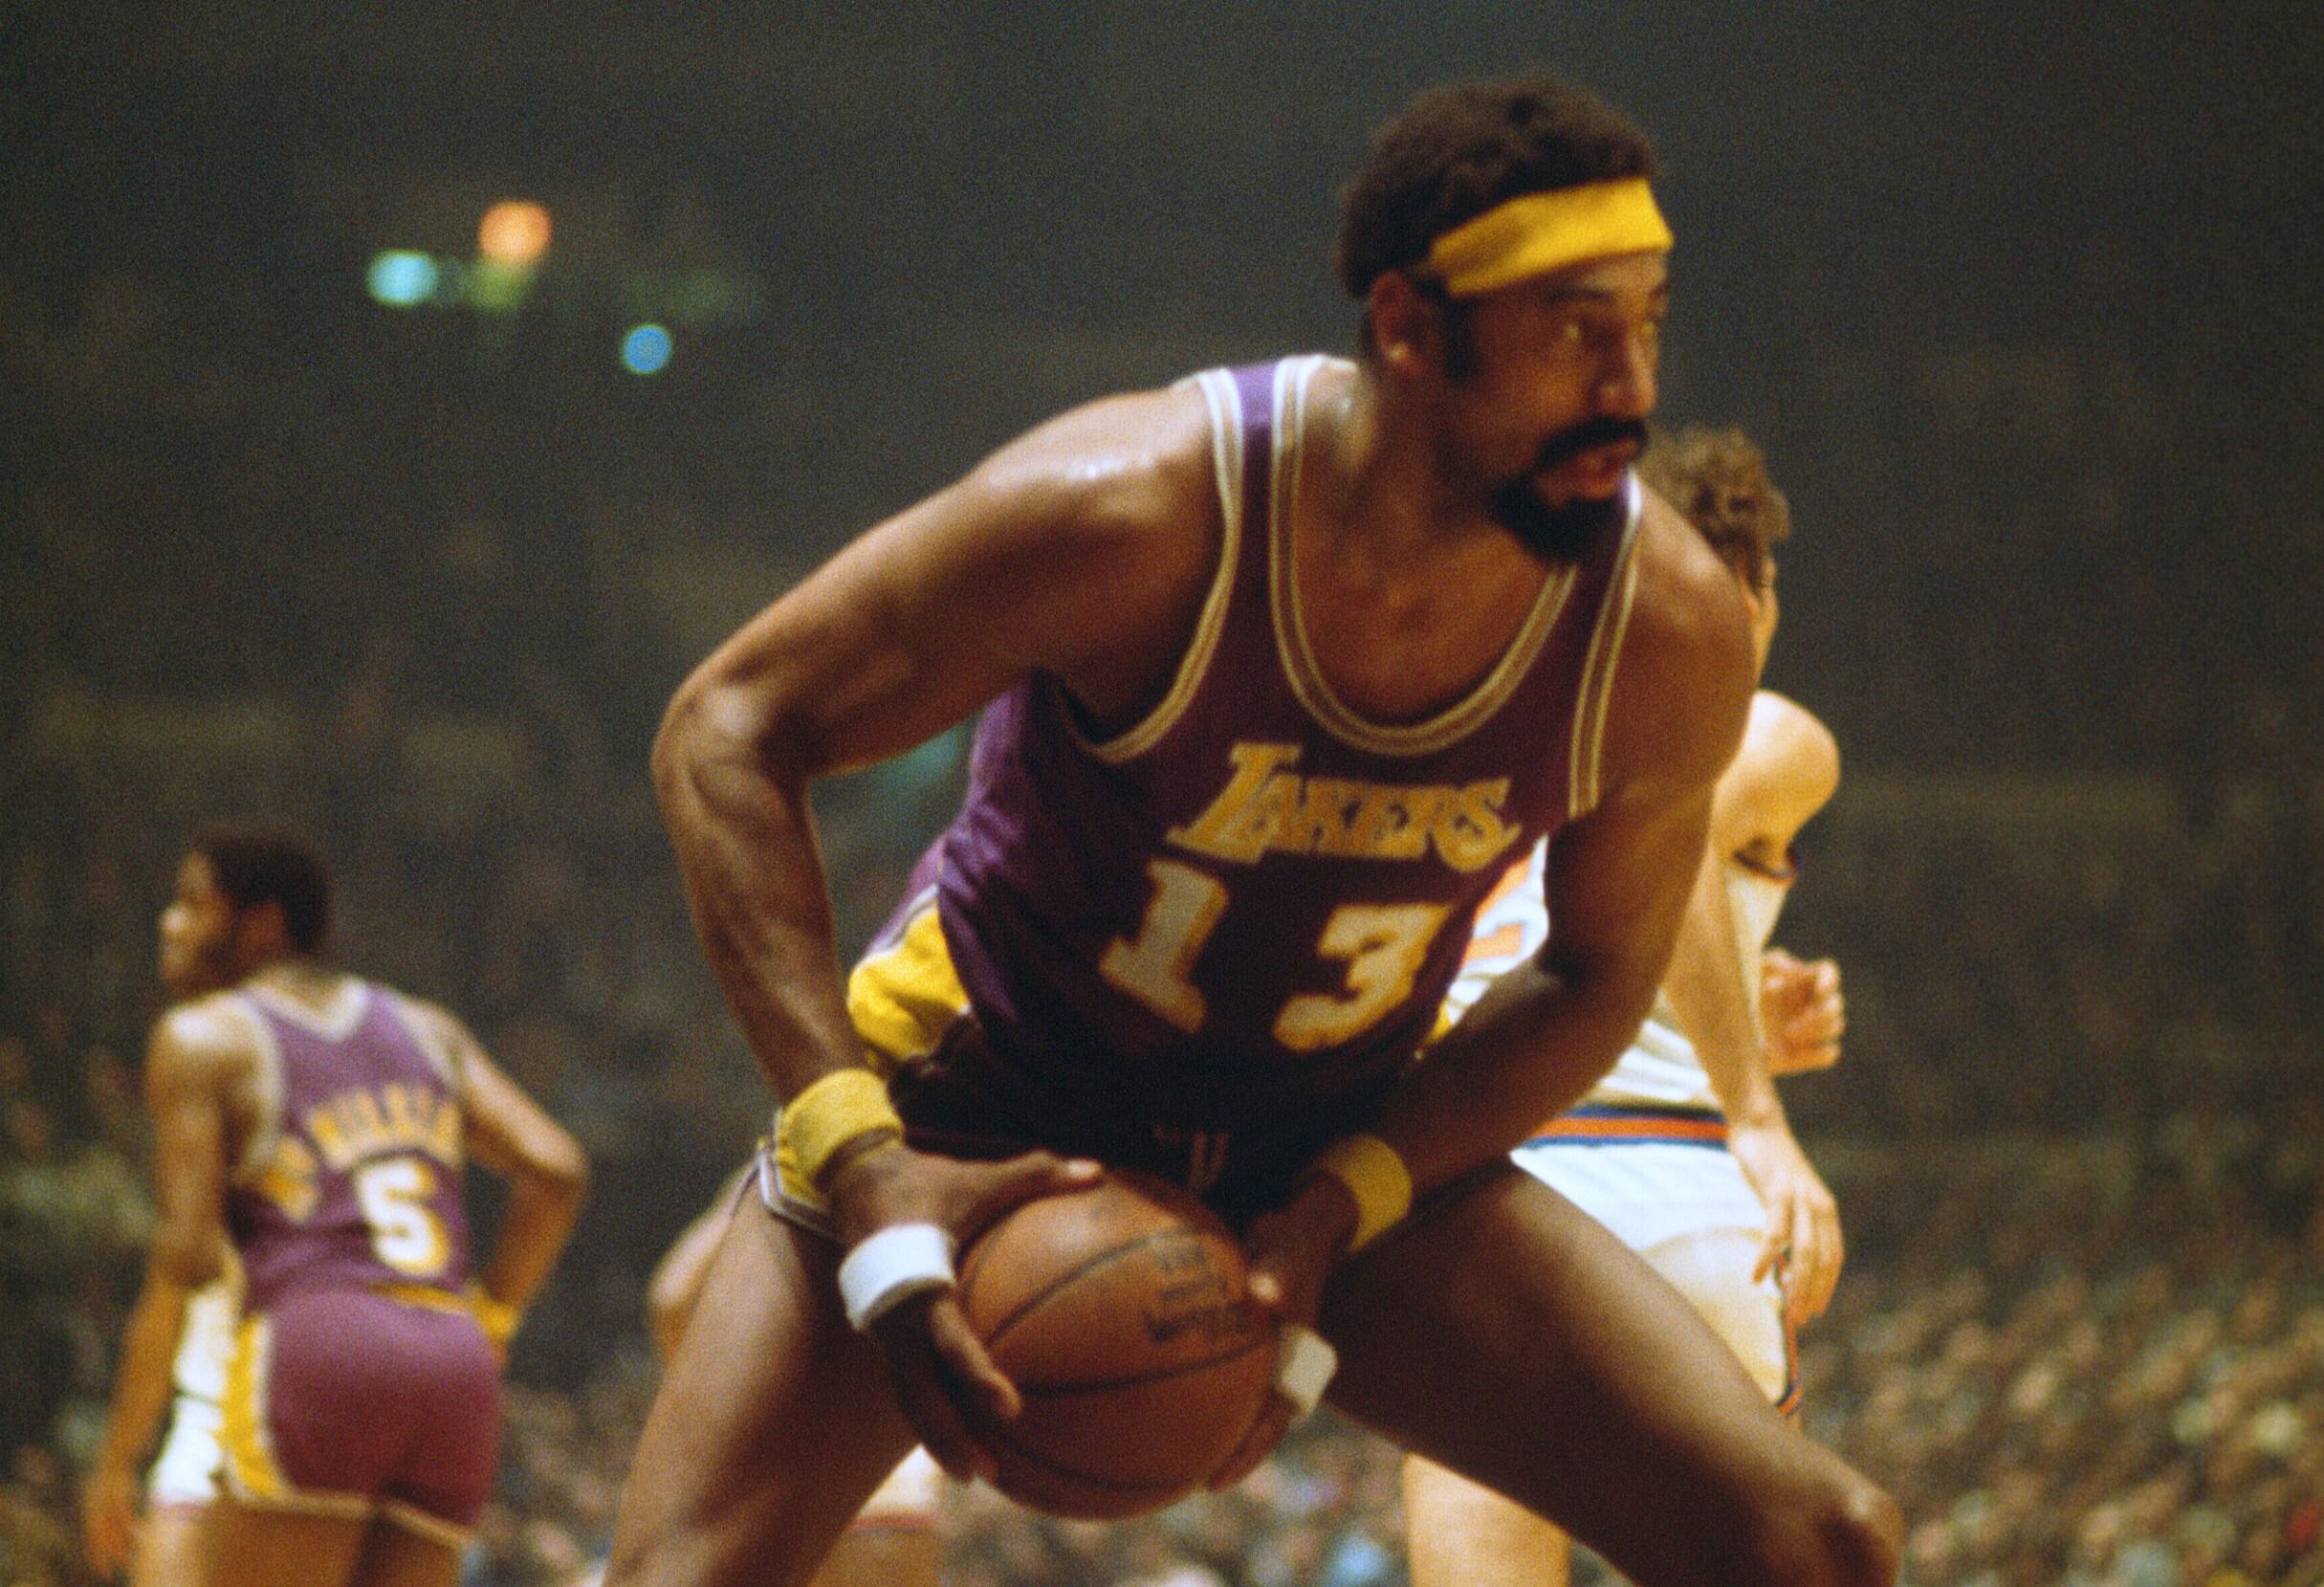 Wilt Chamberlain Never Saw His 30,000th Point Go Through the Hoop and Fumed Over the Irony of It After the Game